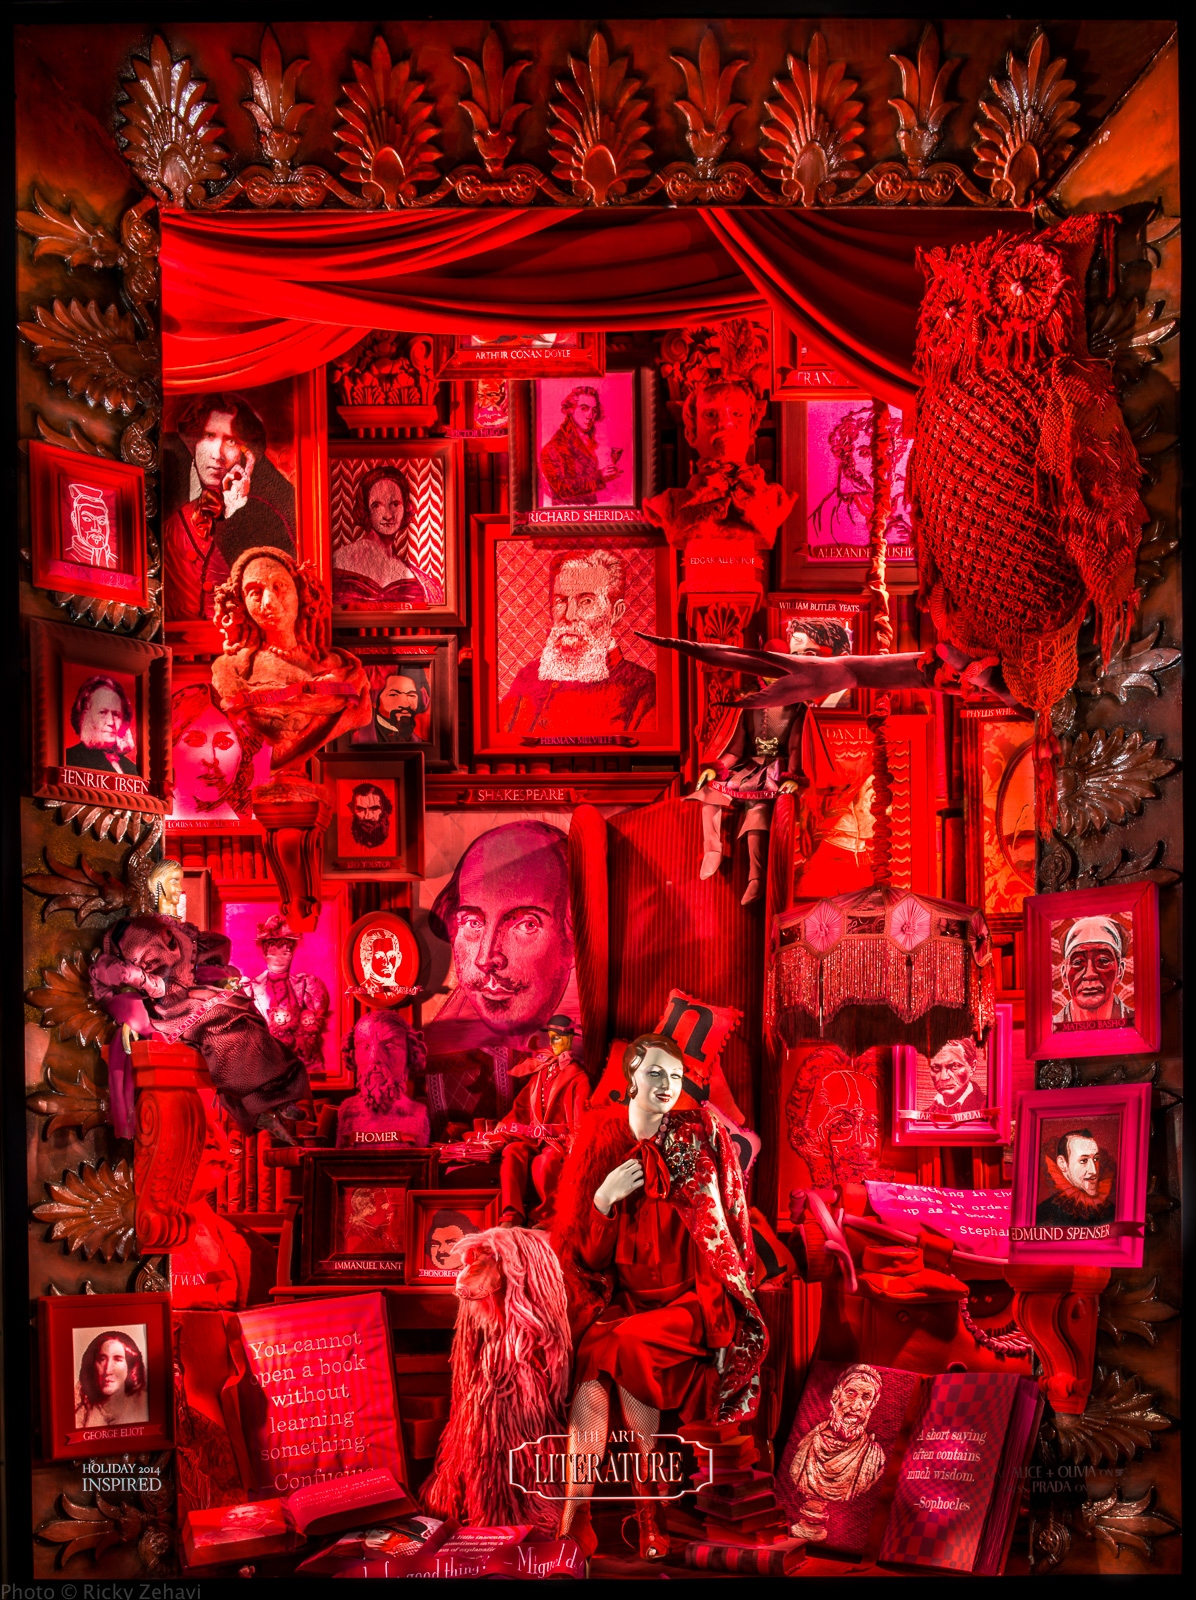 David Hoey Windows At Bergdorf Goodman Available For Immediate Sale At  Sotheby's